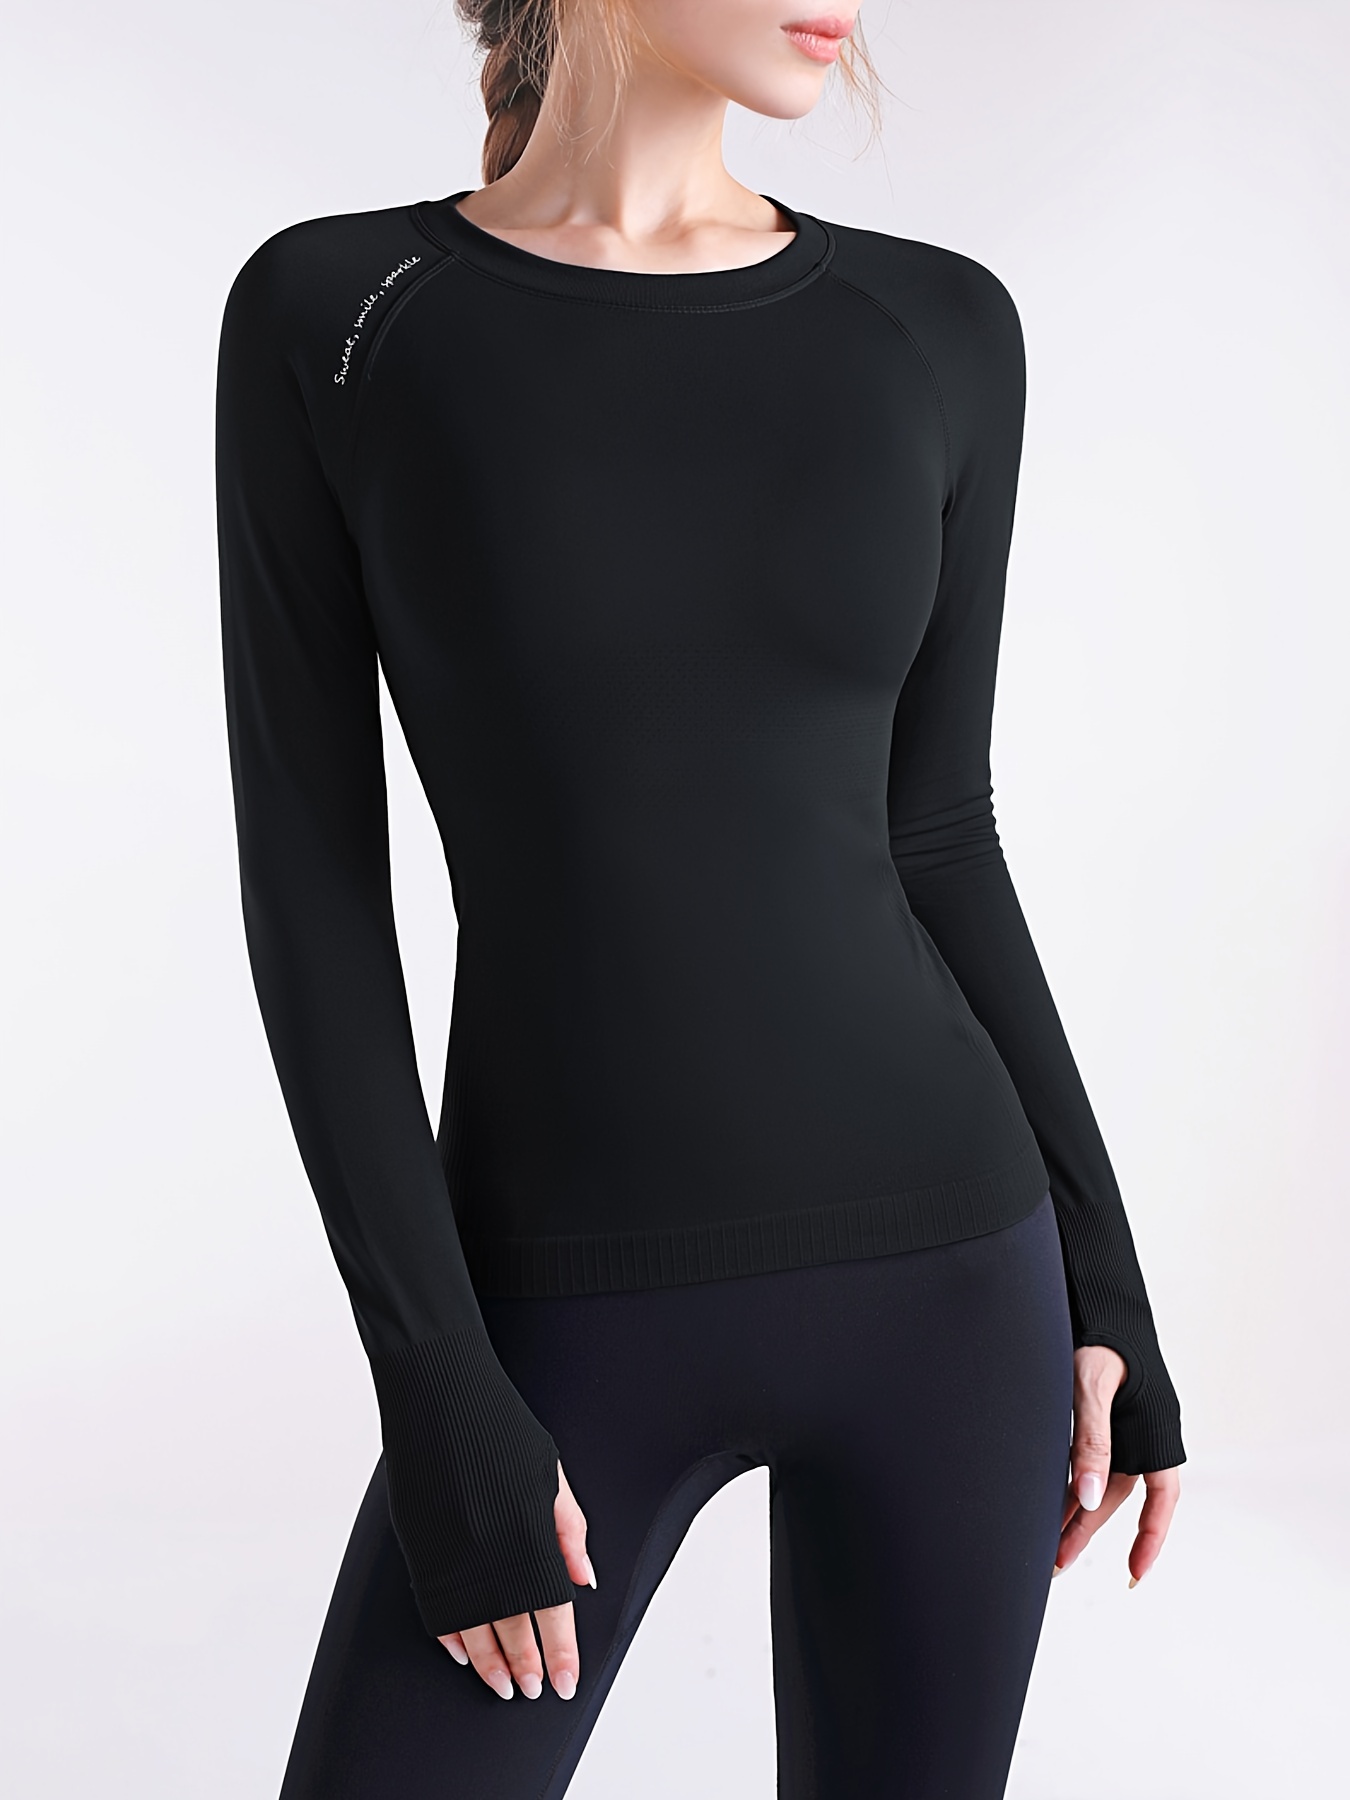 Women's Glossy Silky Long Sleeves Gym Shirts Top Compression Workout Yoga  Tops 